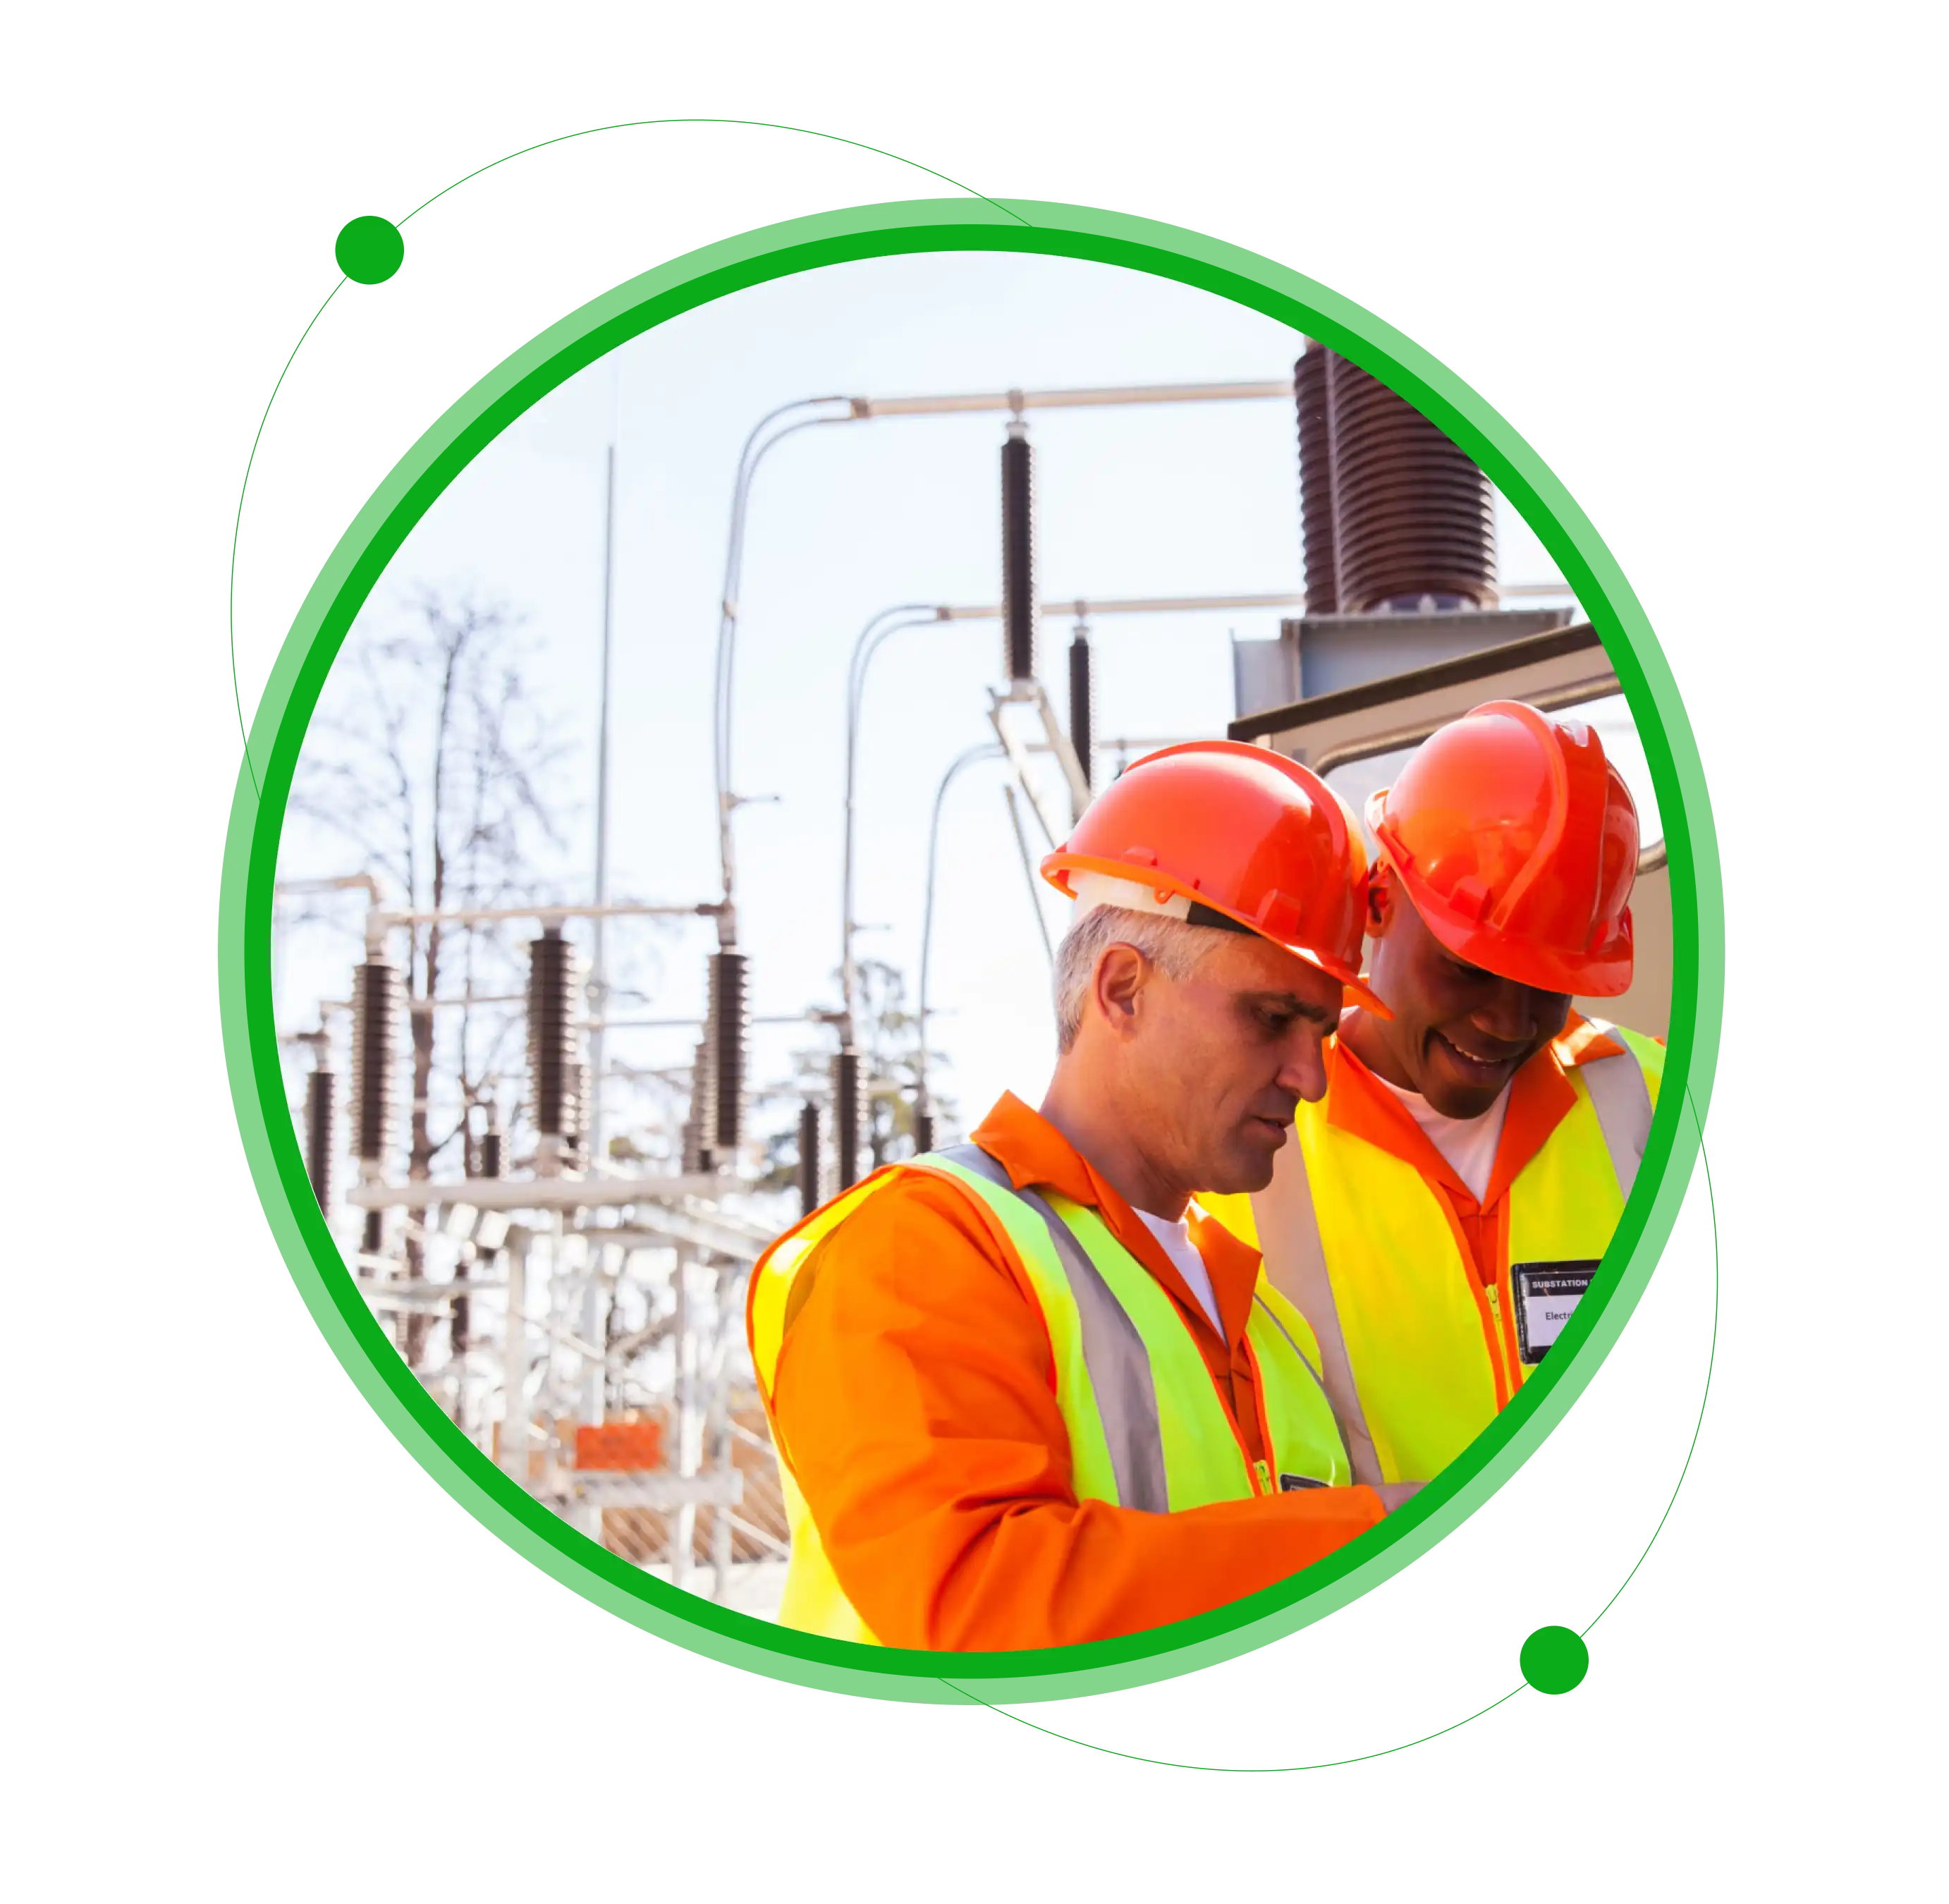 Activities That Come Under Energized Electrical Work Permit